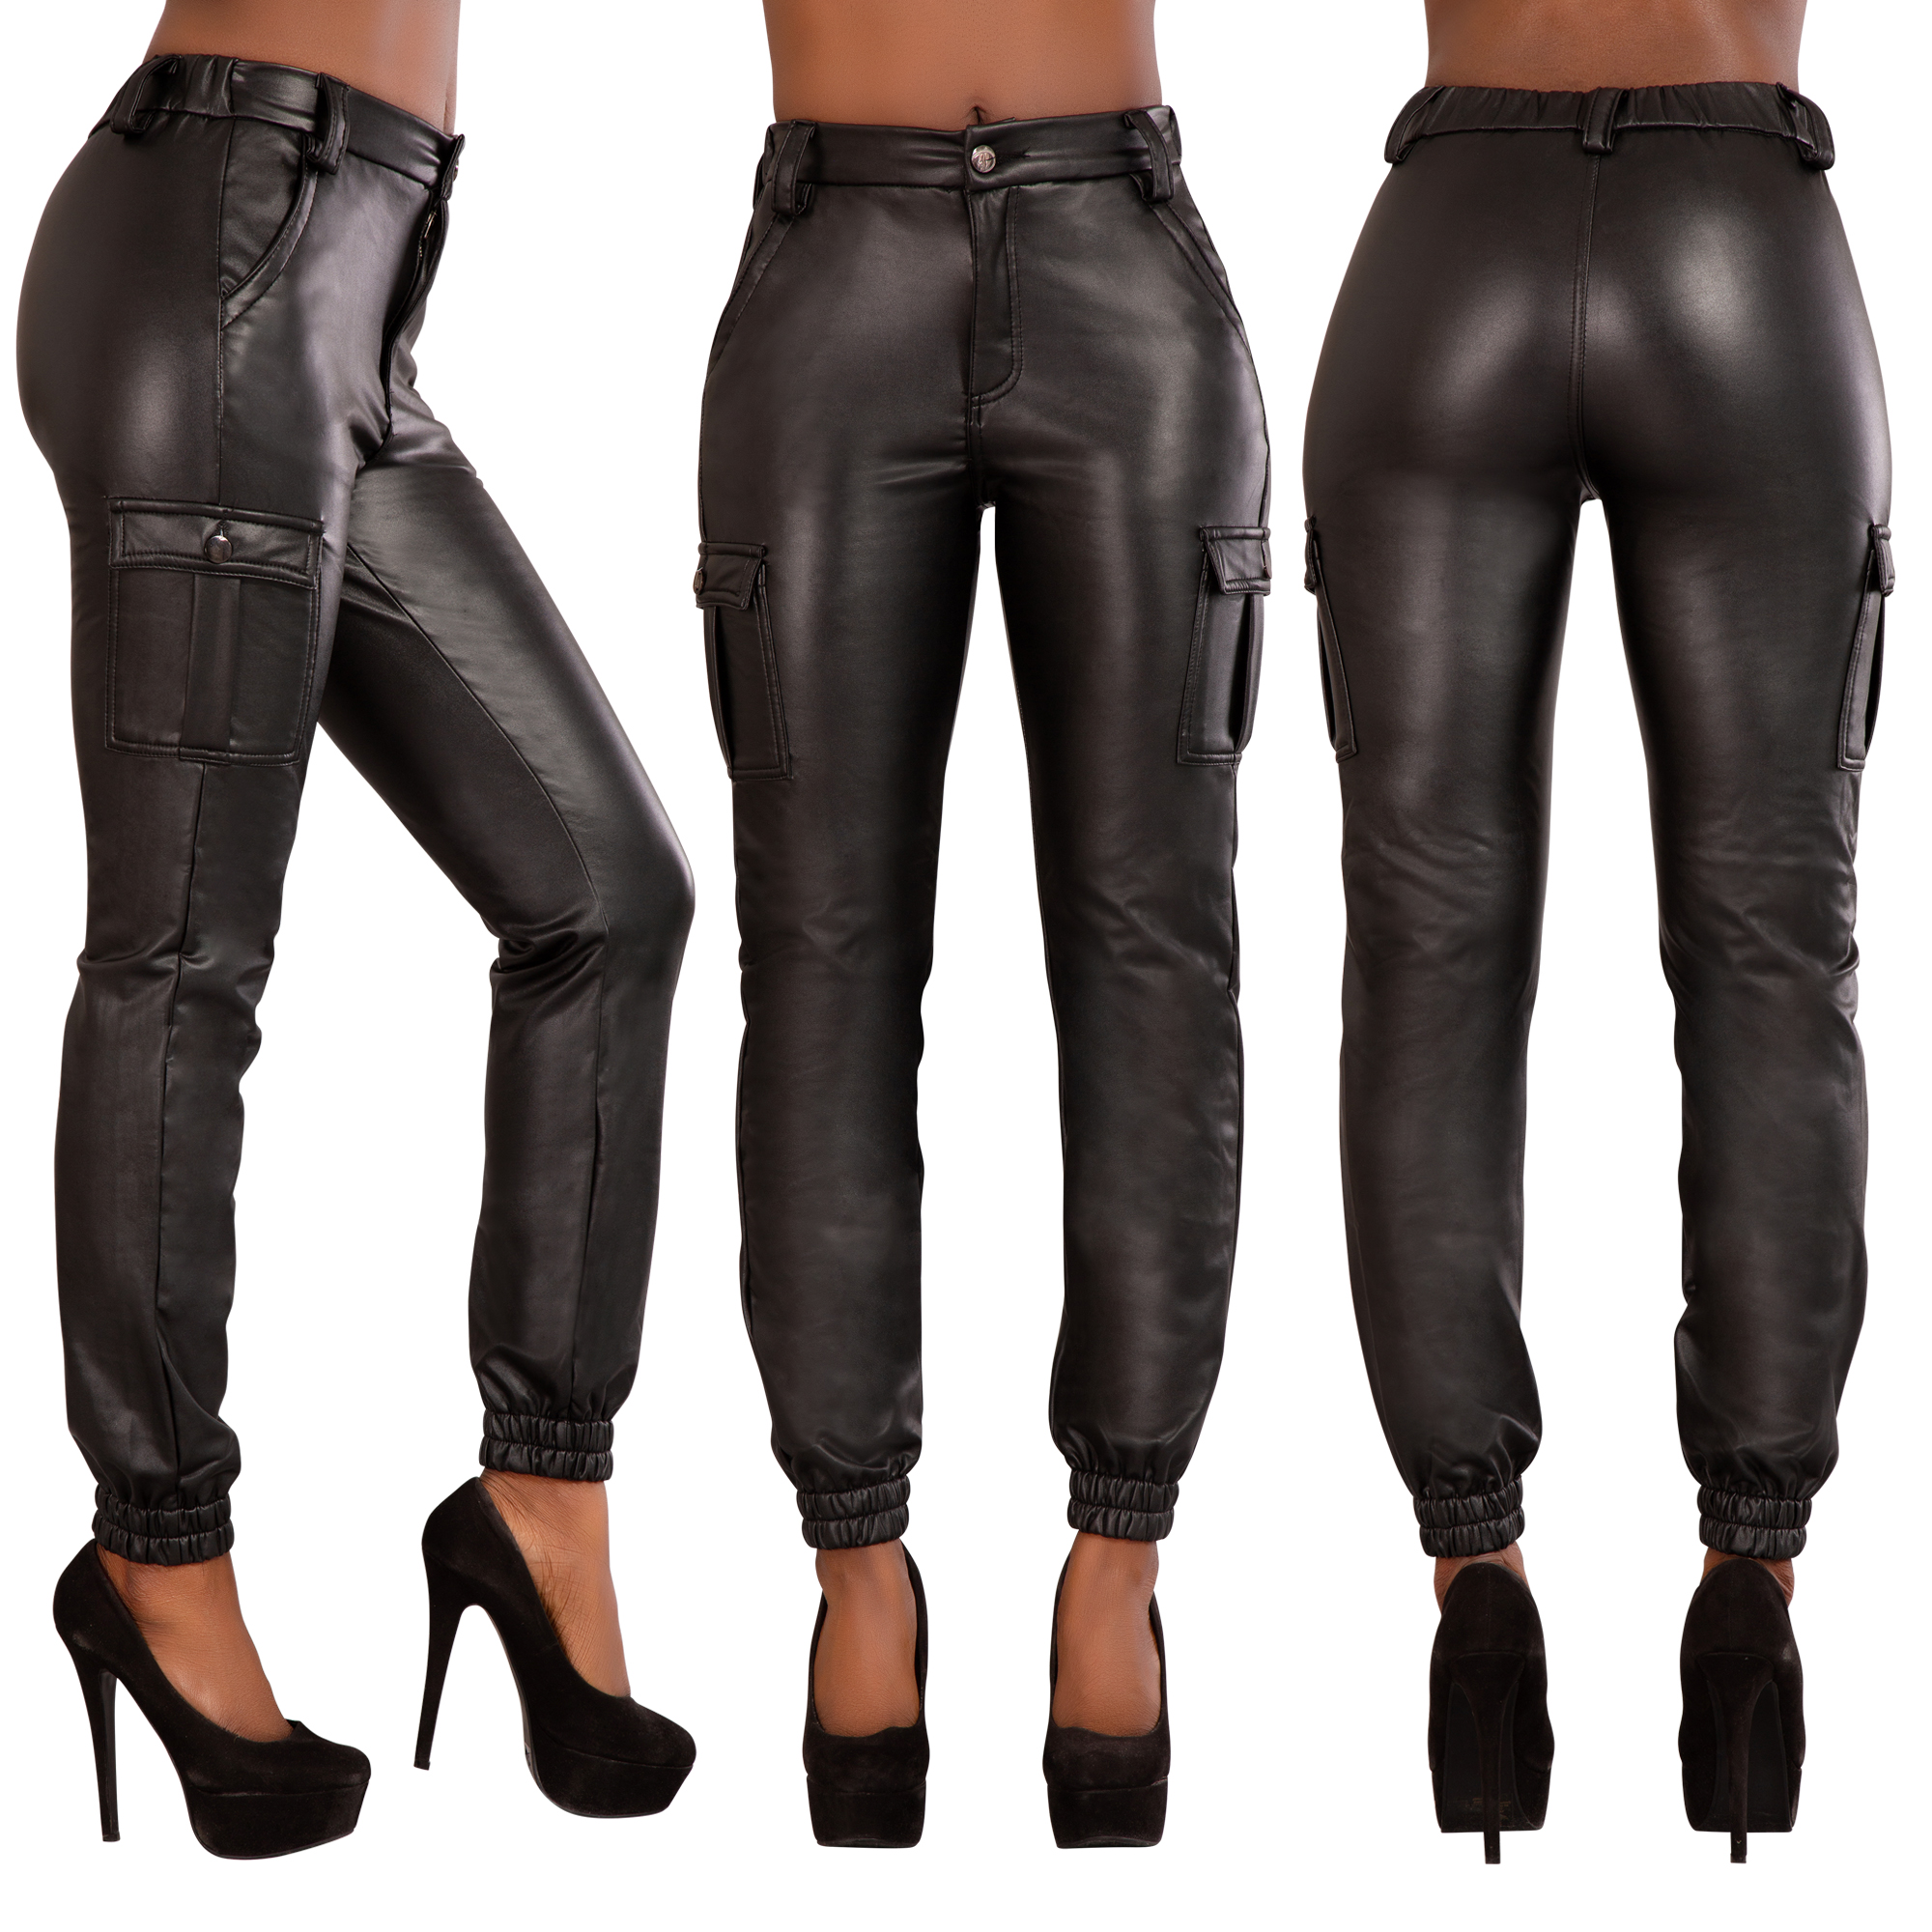 Womens Black Pu Leather Look Trousers Ladies Cargo Stretch Pants Size 6 14 Ebay 